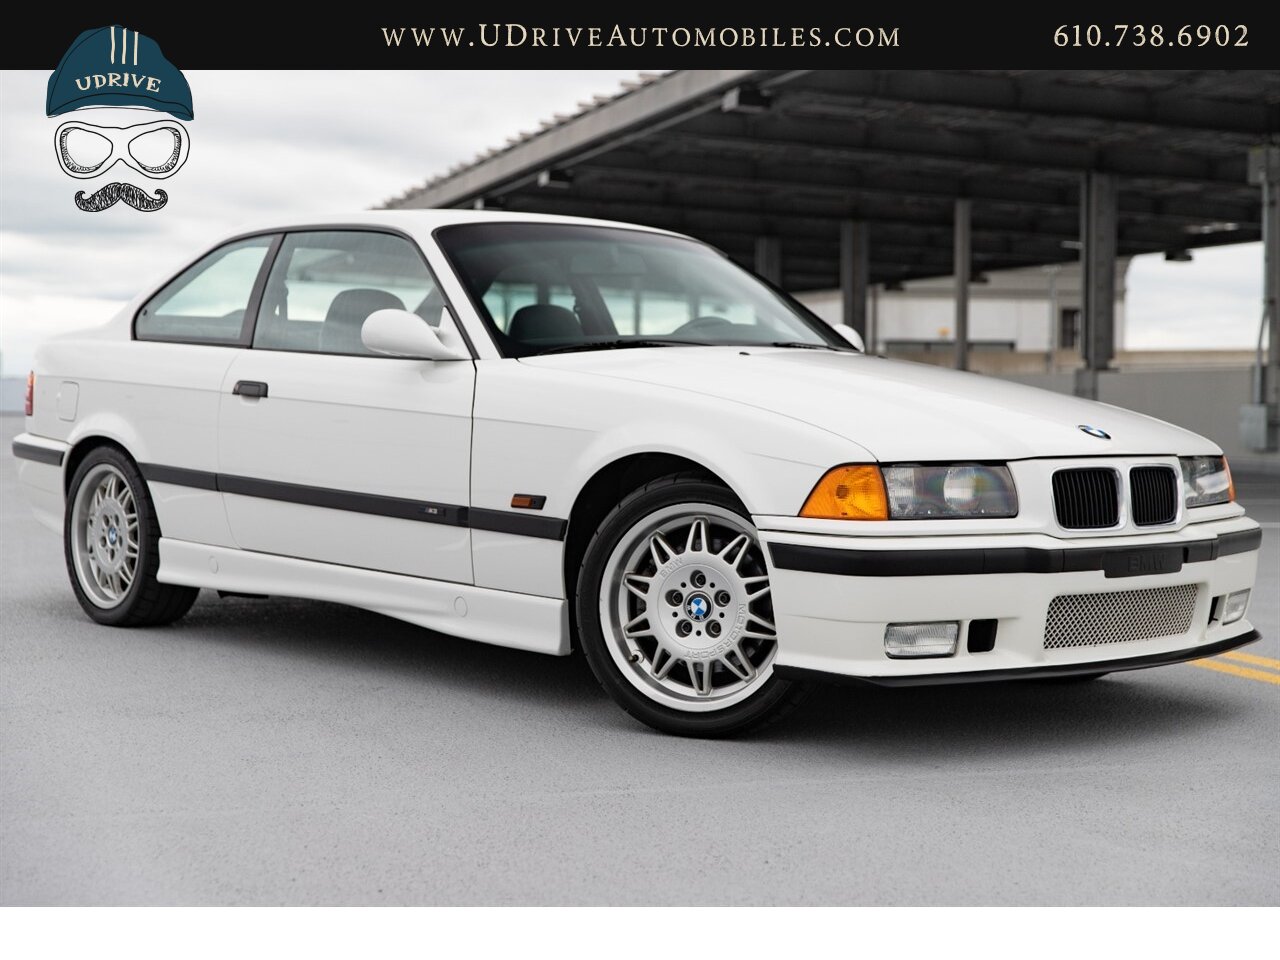 1995 BMW M3 E36 Alpine White over Black Vader Seats  5 Speed - Photo 4 - West Chester, PA 19382